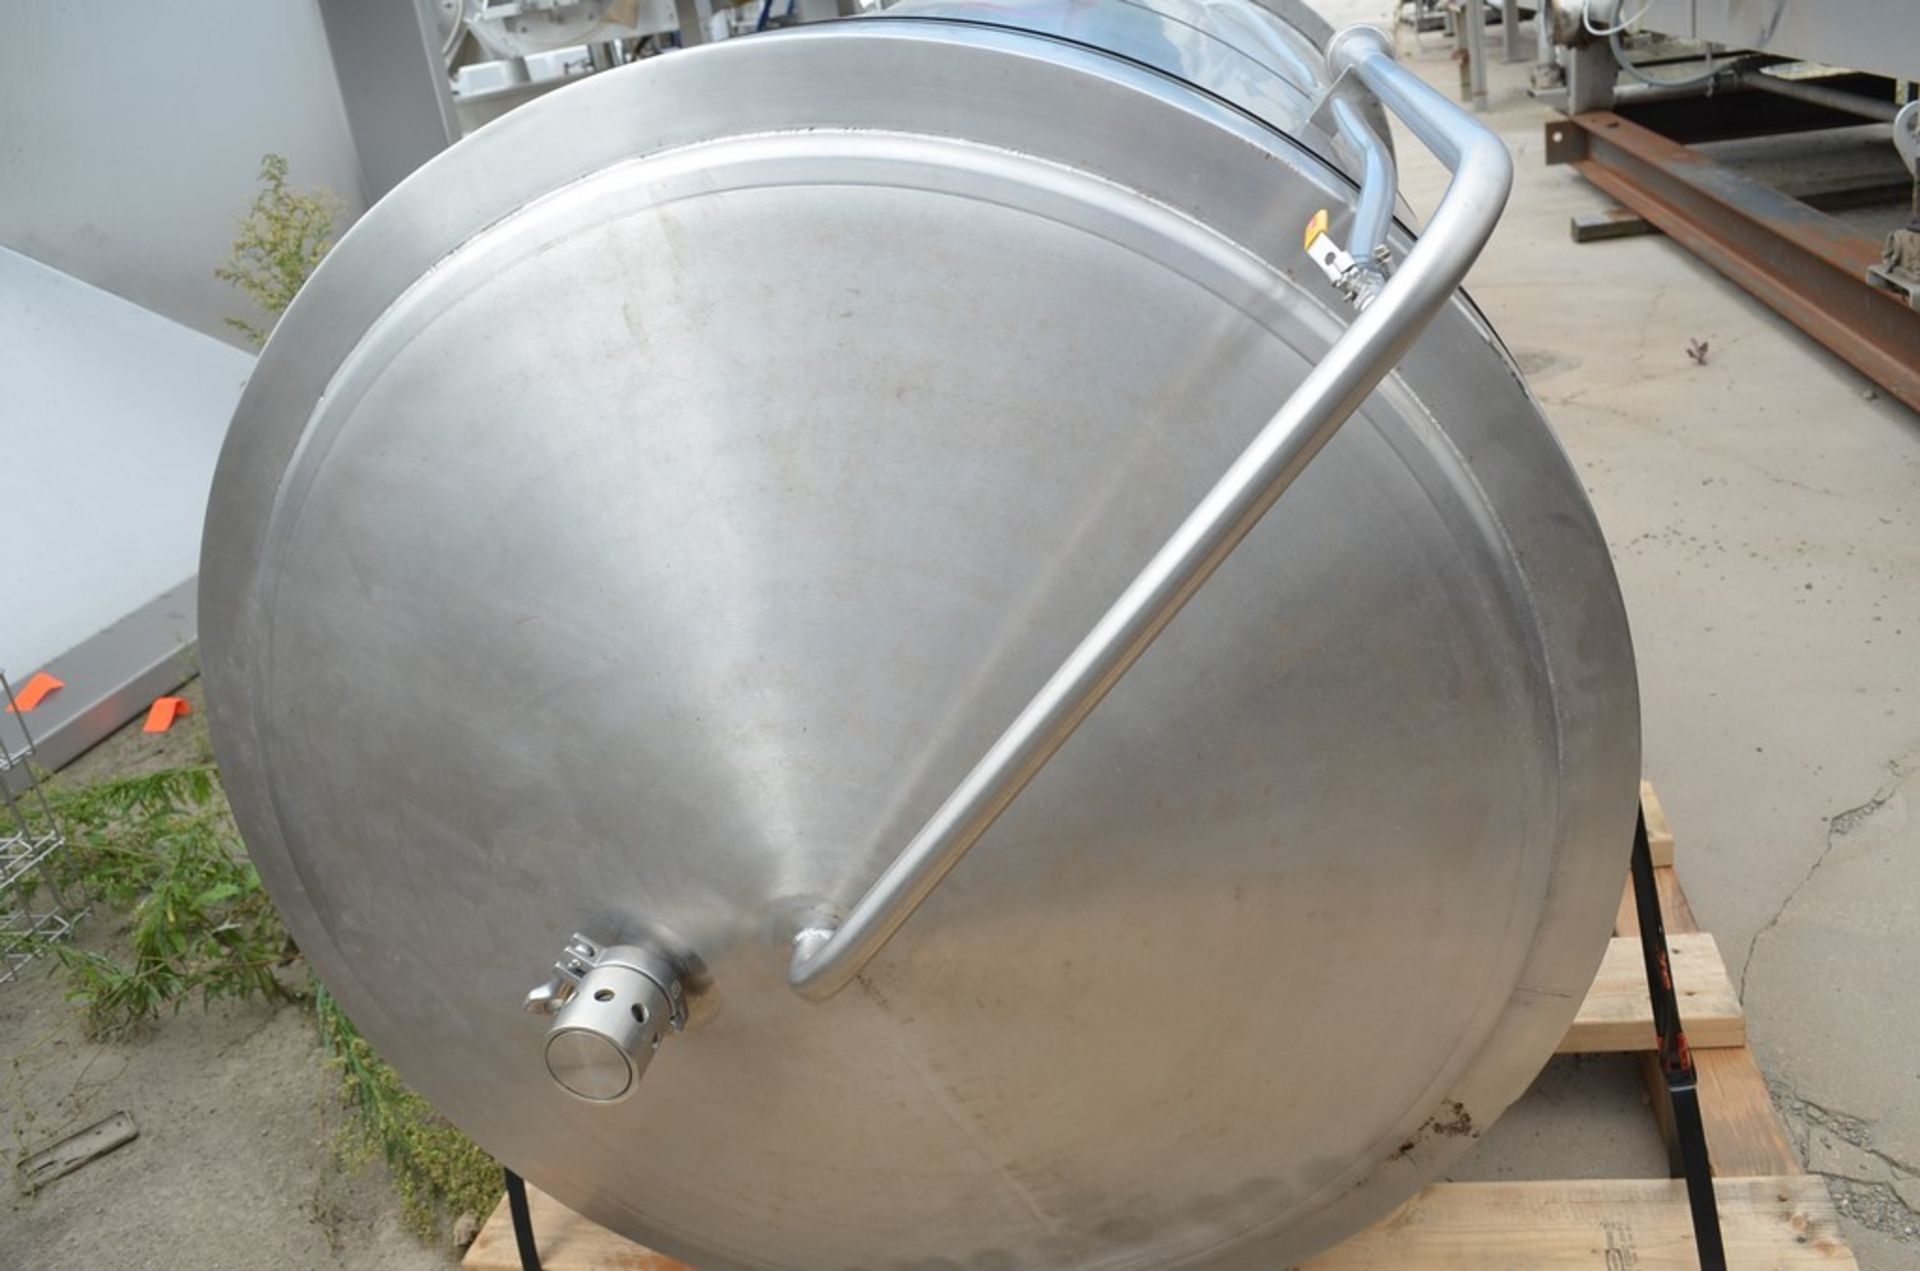 8.5 BBL (1,000 Liter/265 Gallons) Cote Manufacturing Vertical S/S Jacketed Brite Tank. Dome Top, - Image 8 of 11